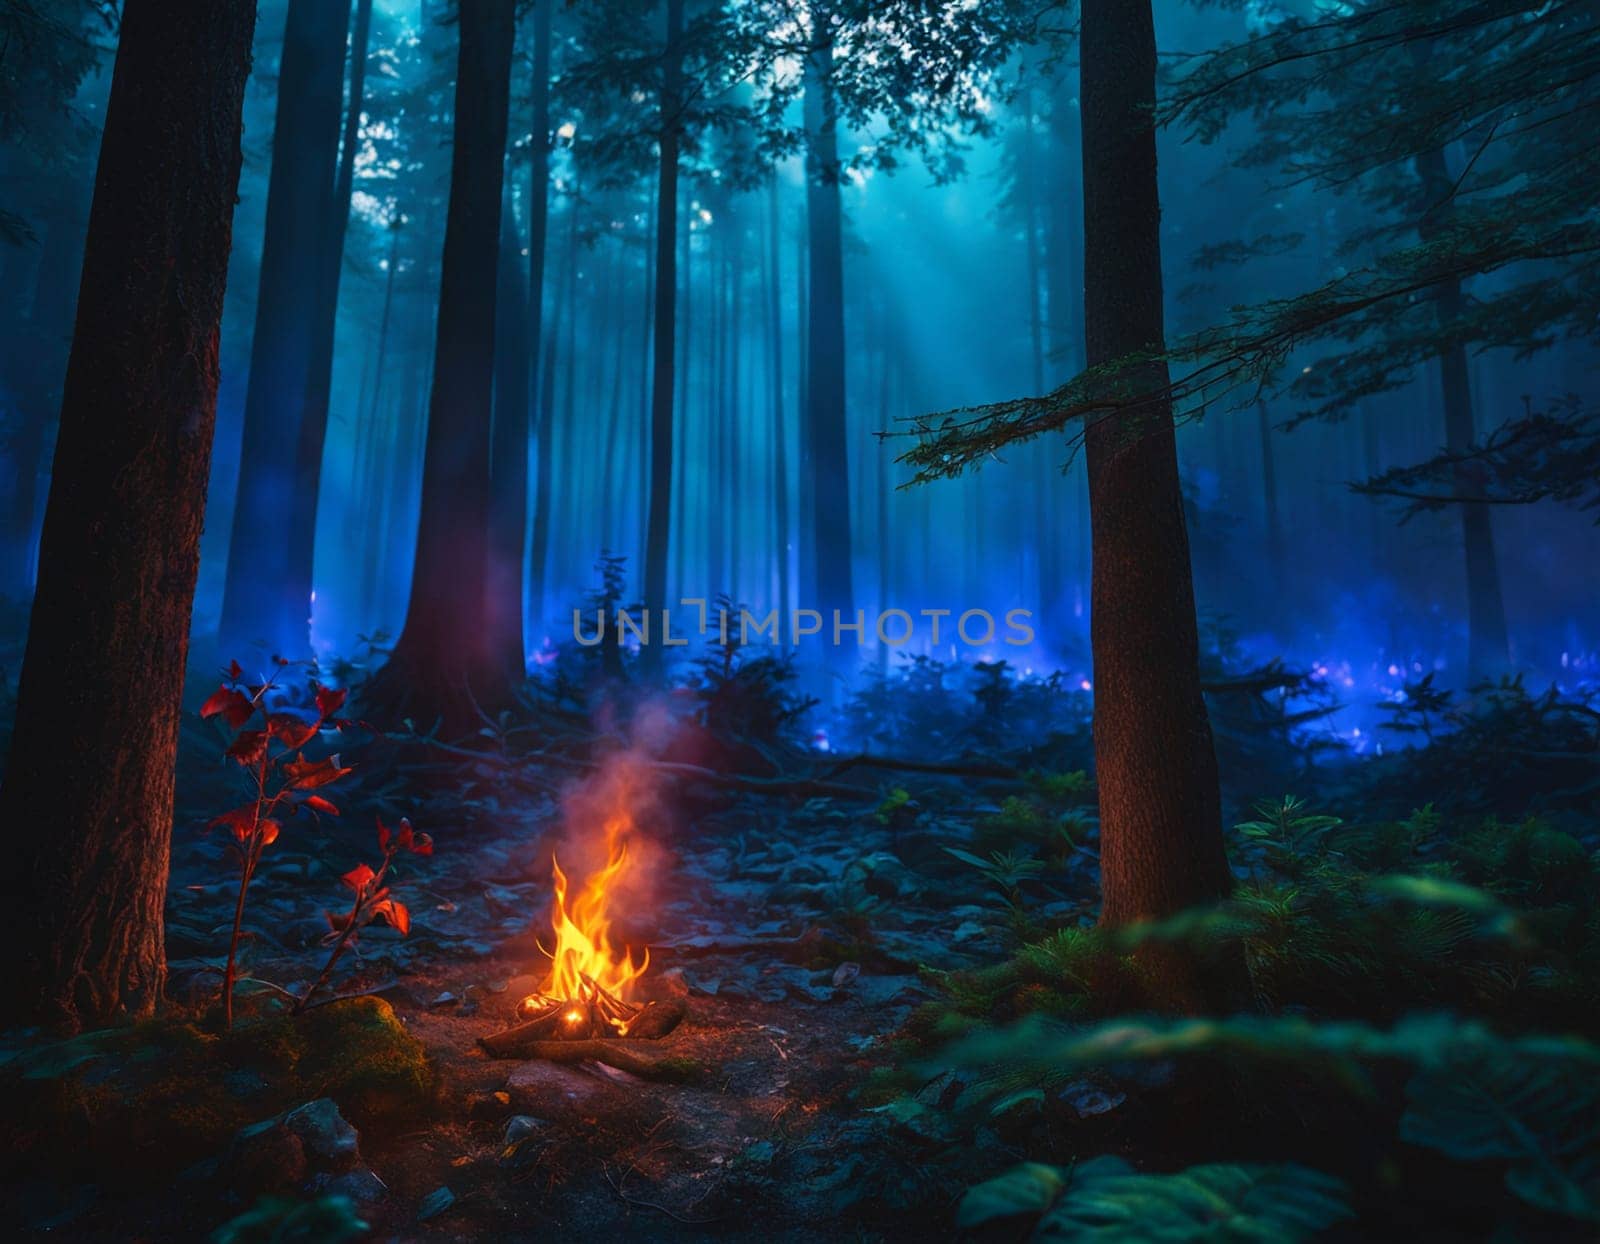 Bonfire in the dark forest. High quality illustration